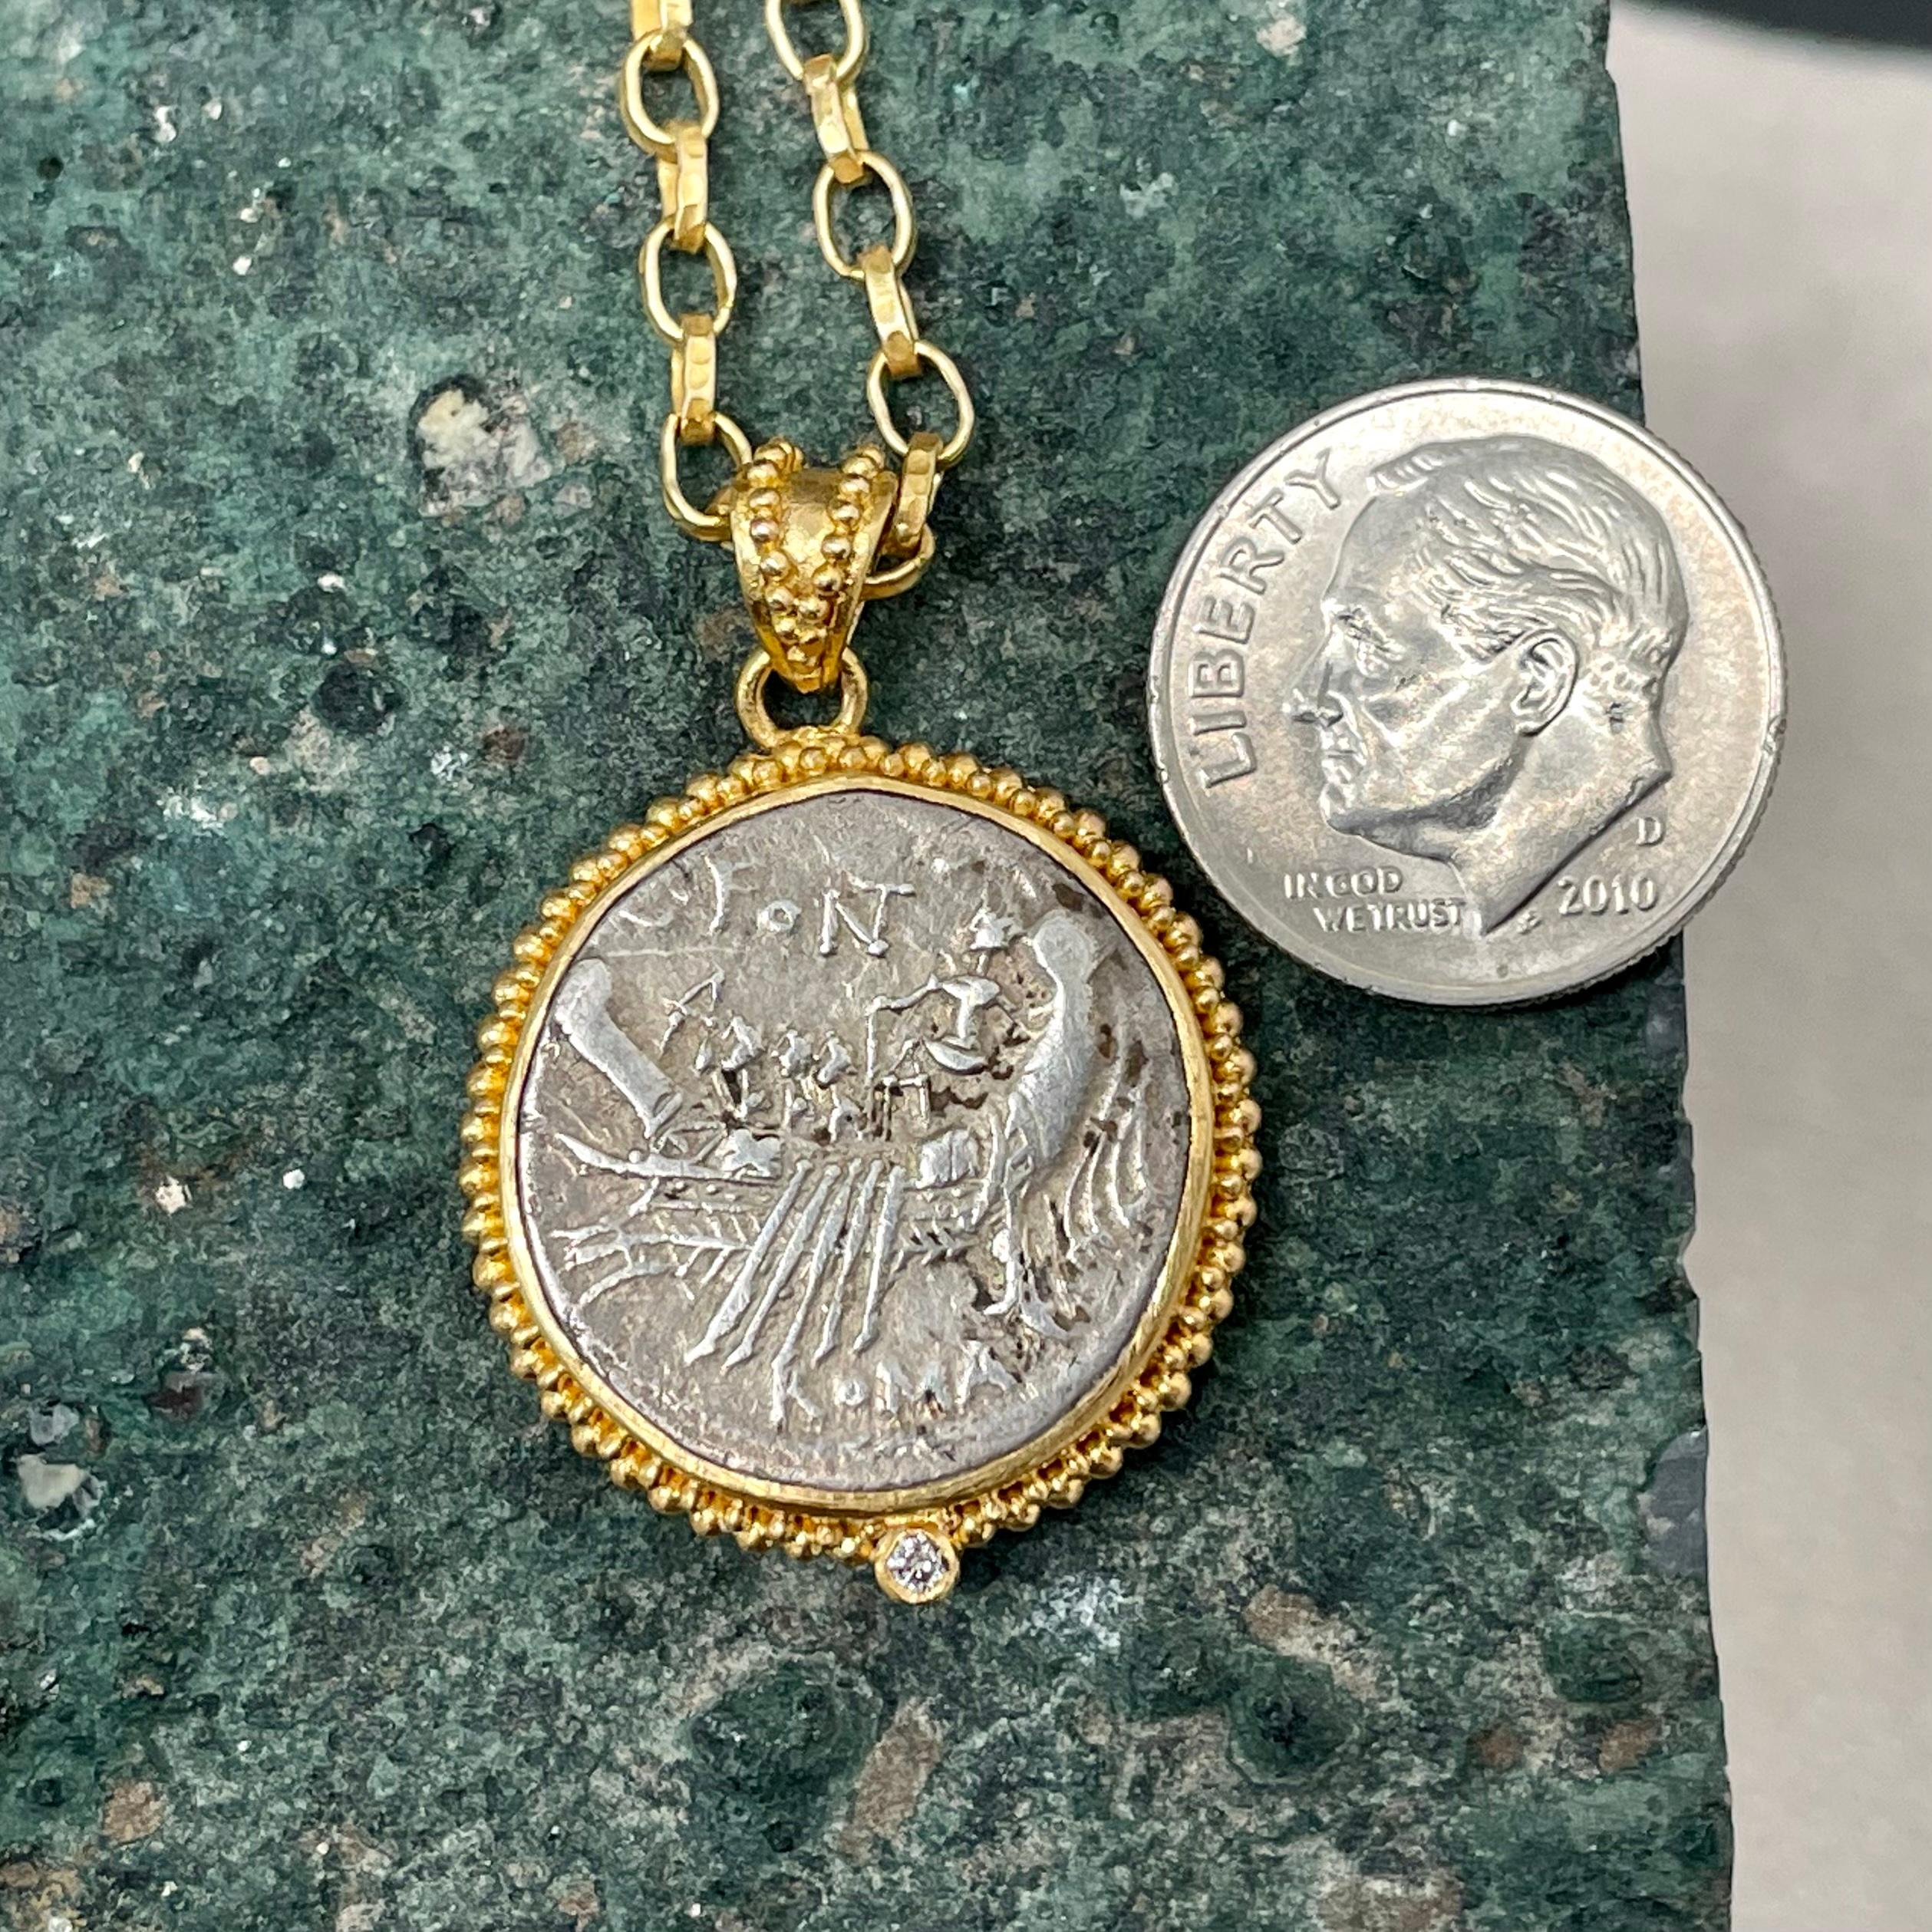 ancient coin pendant